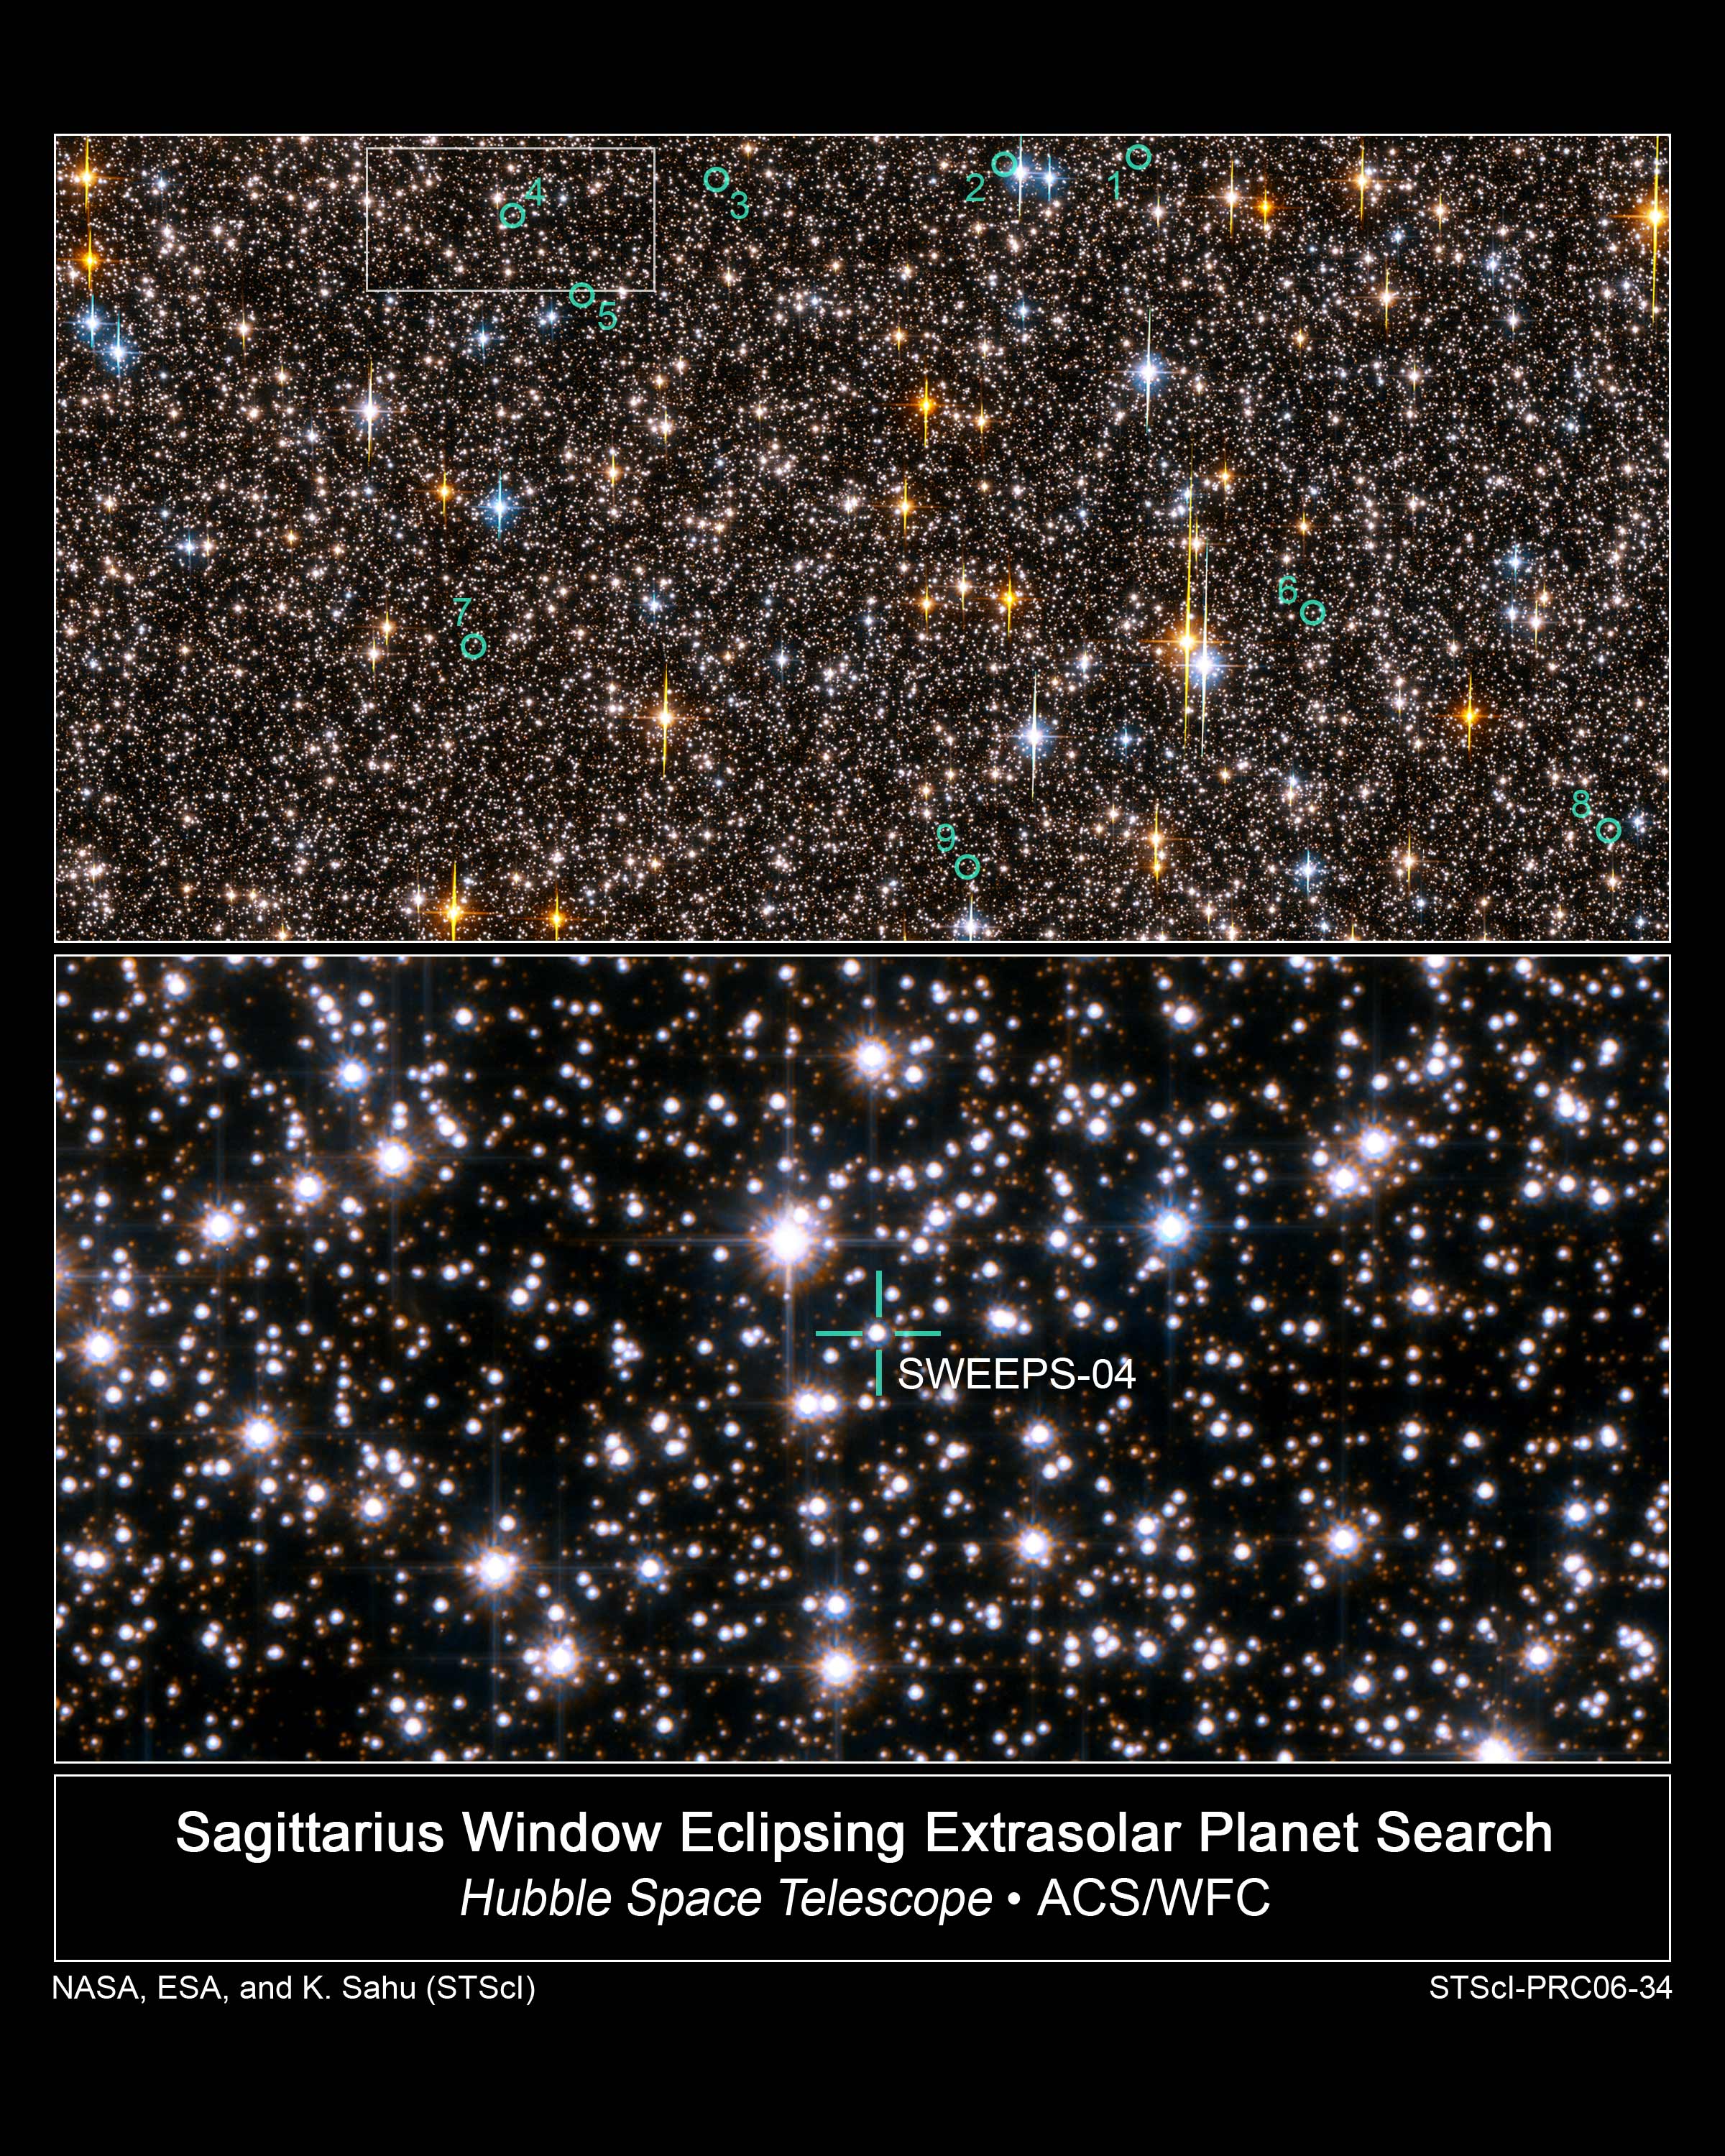 This is an image of one-half of the Hubble Space Telescope field of view in the Sagittarius Window Eclipsing Extrasolar Planet Search 
